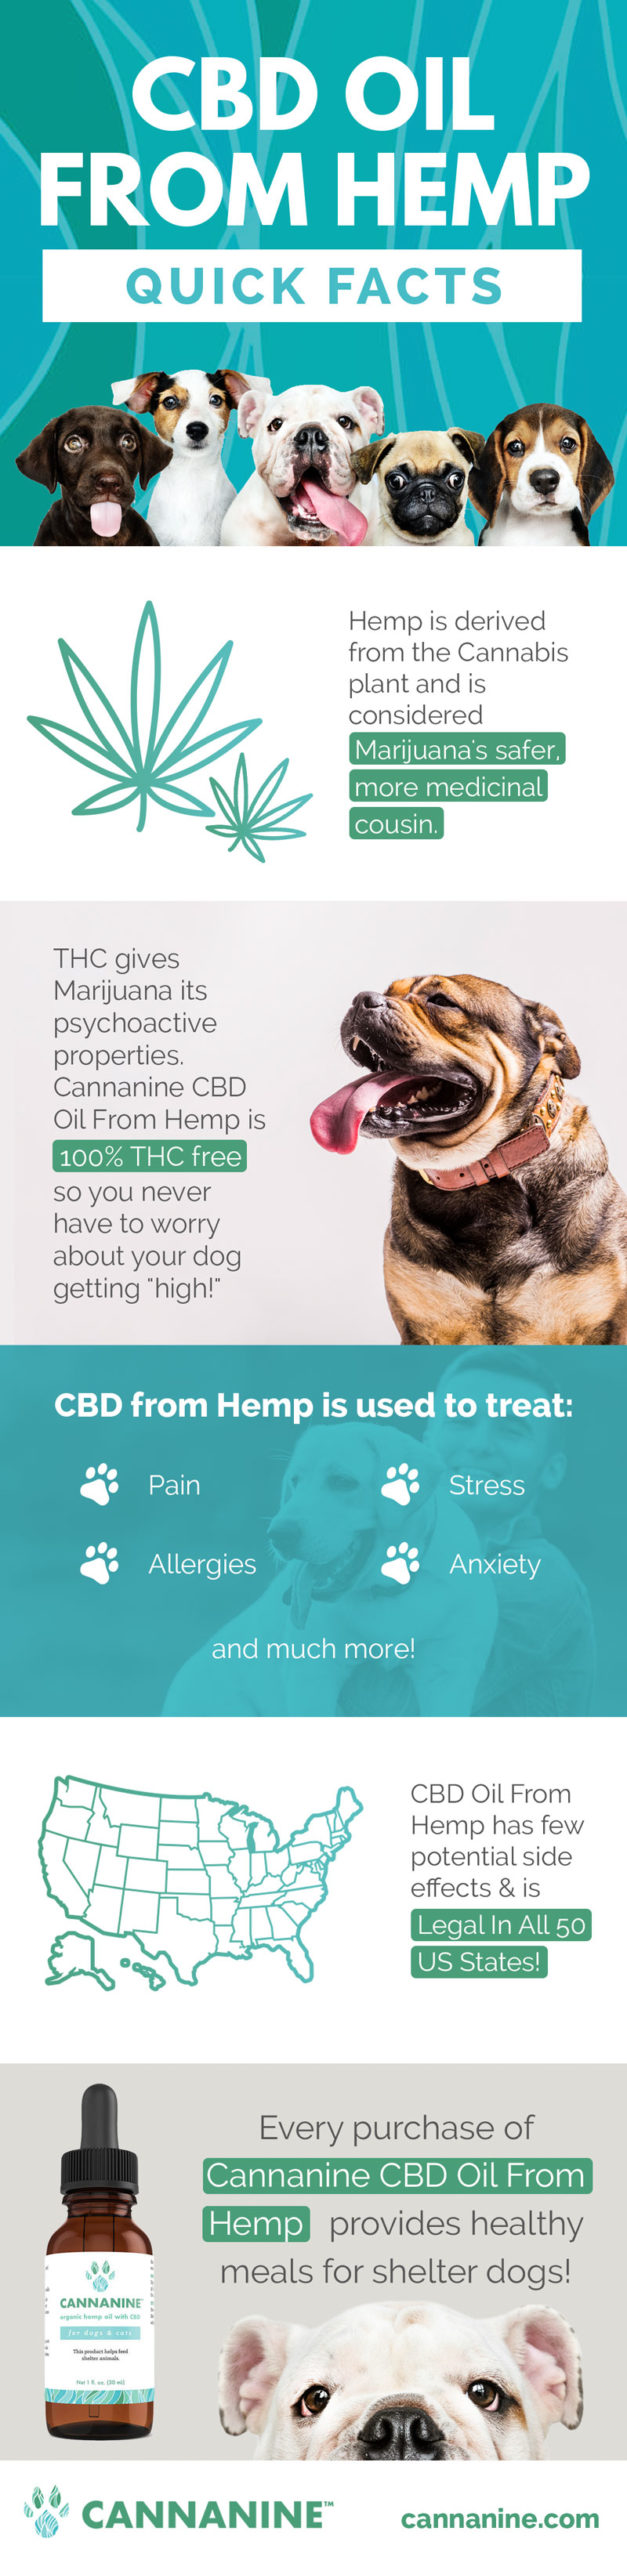 How Long Does Cbd Oil Take To Work On Dogs